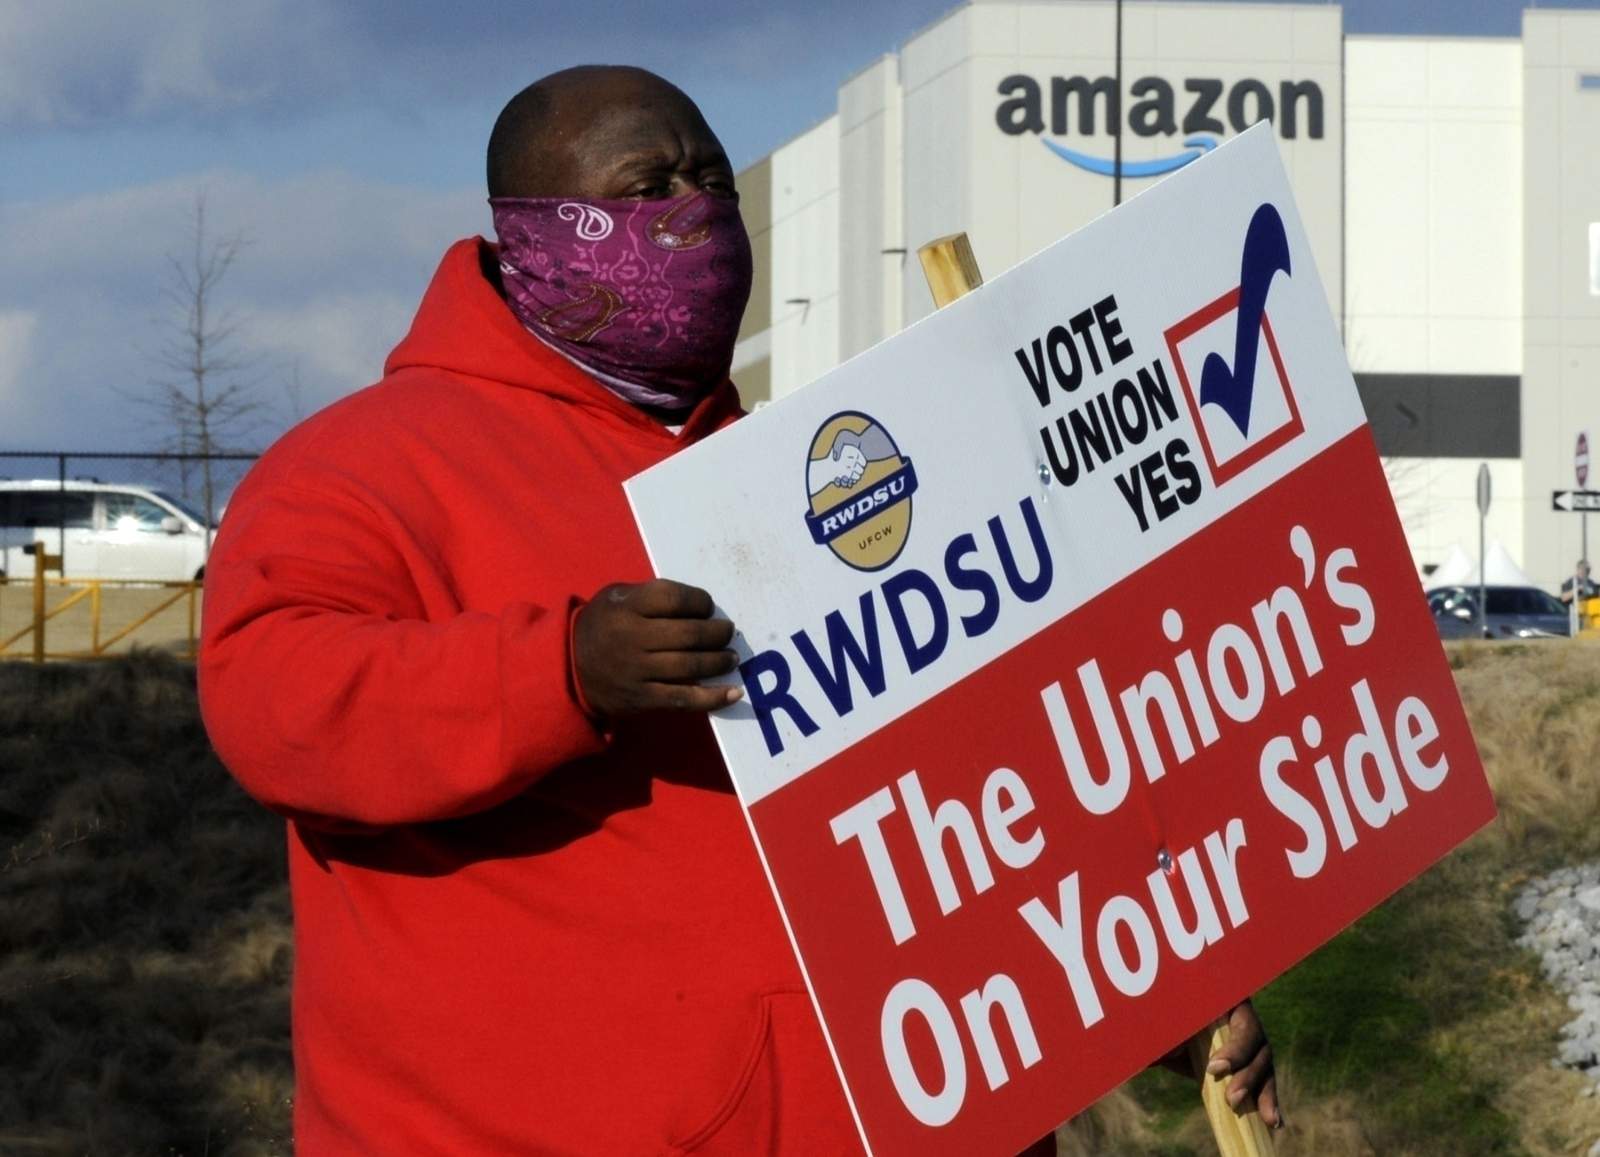 EXPLAINER: What to know about the Amazon union vote count